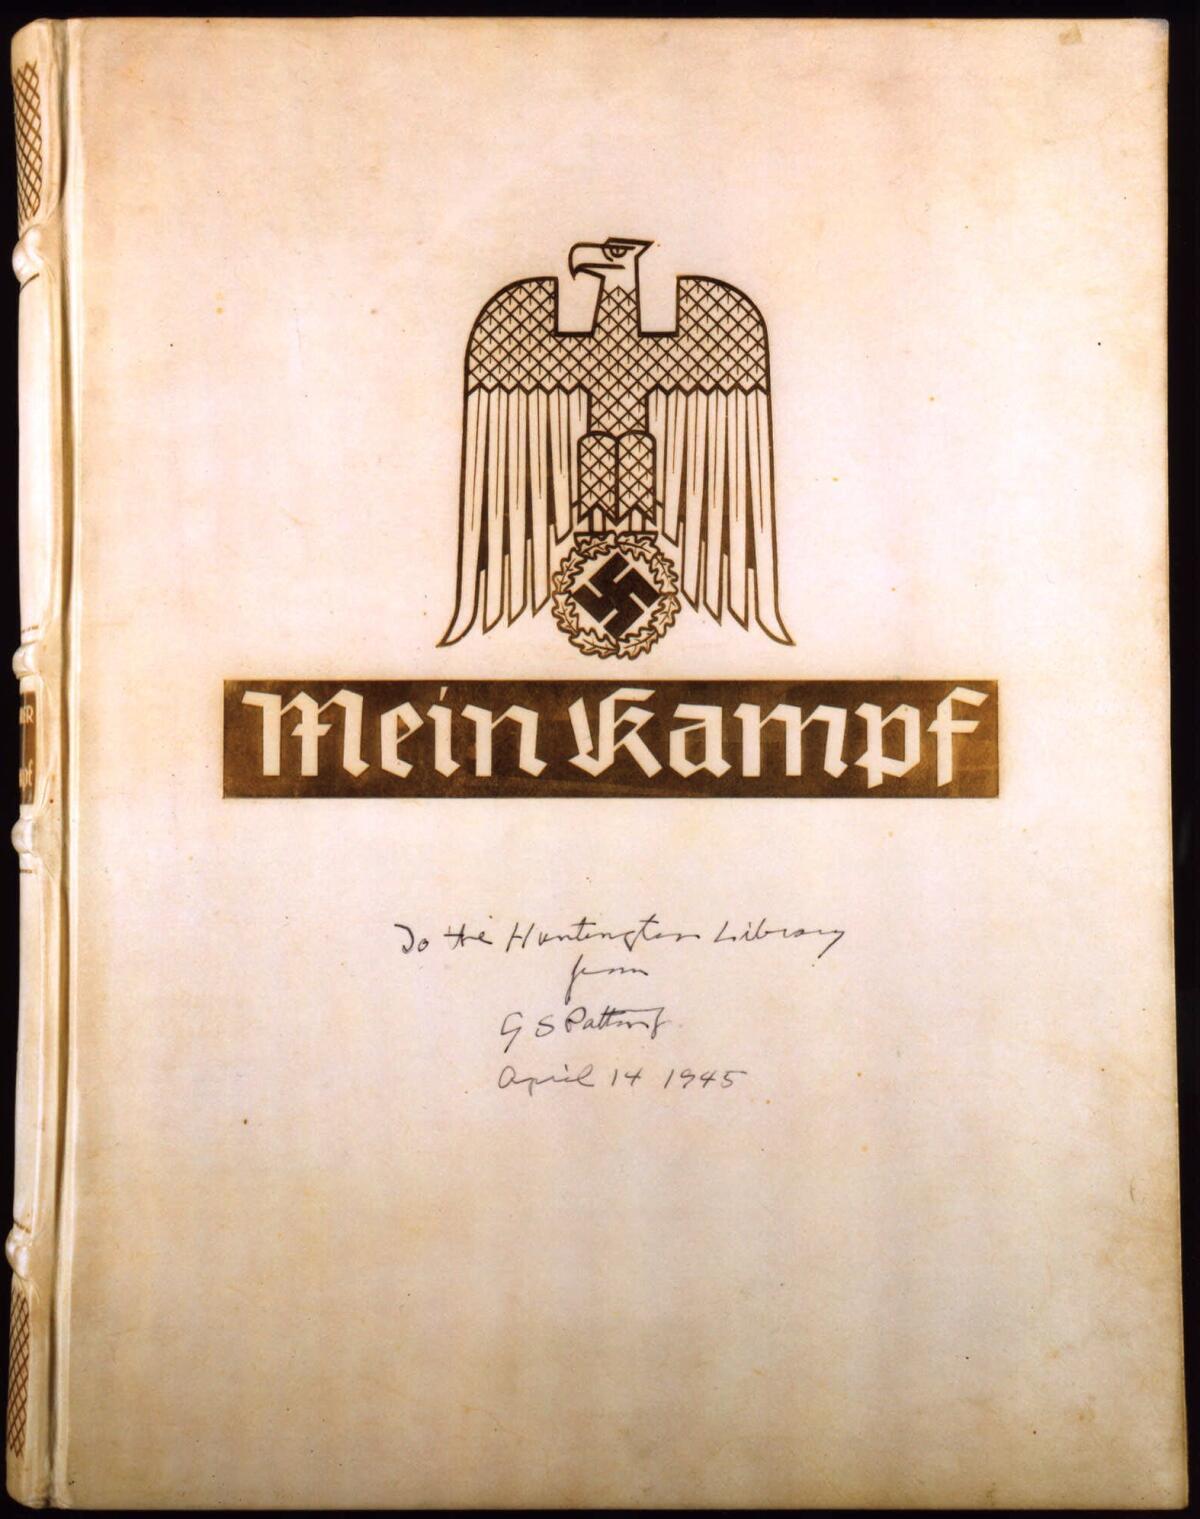 Adolf Hitler's "Mein Kampf" has become an e-book bestseller. Gen. George Patton donated this copy to the Huntington Library in 1945.